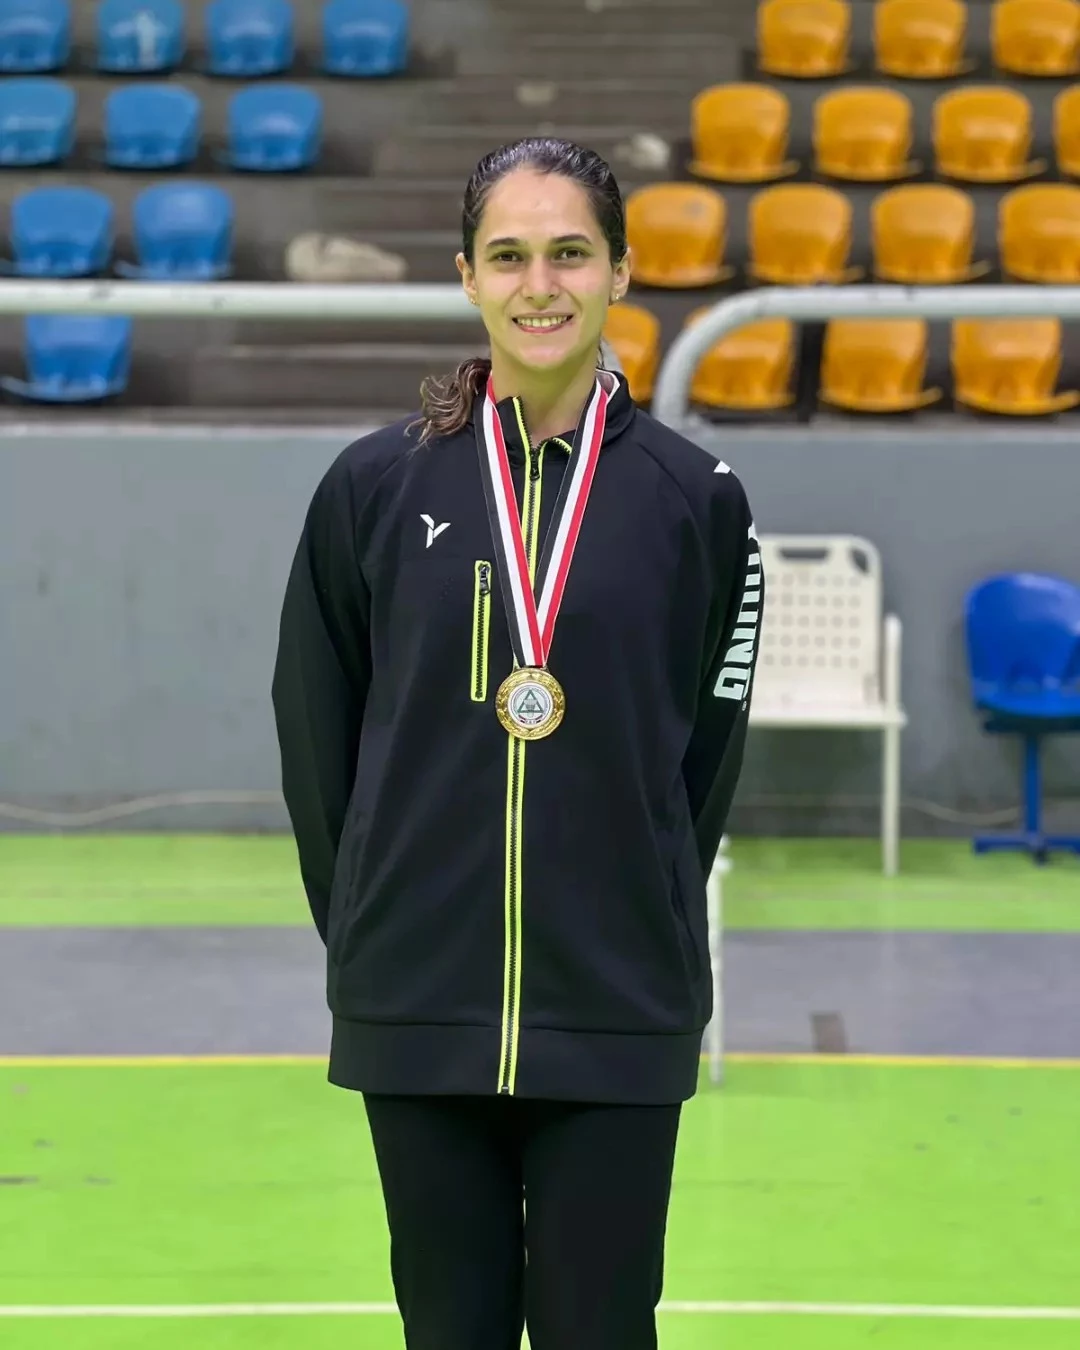 Our young champion and African badminton champion Nour Ahmed Yusri is enrolled in the Faculty of computers and Information Technology, Branch M.The new one is crowned with the gold of the Republic Badminton Championship